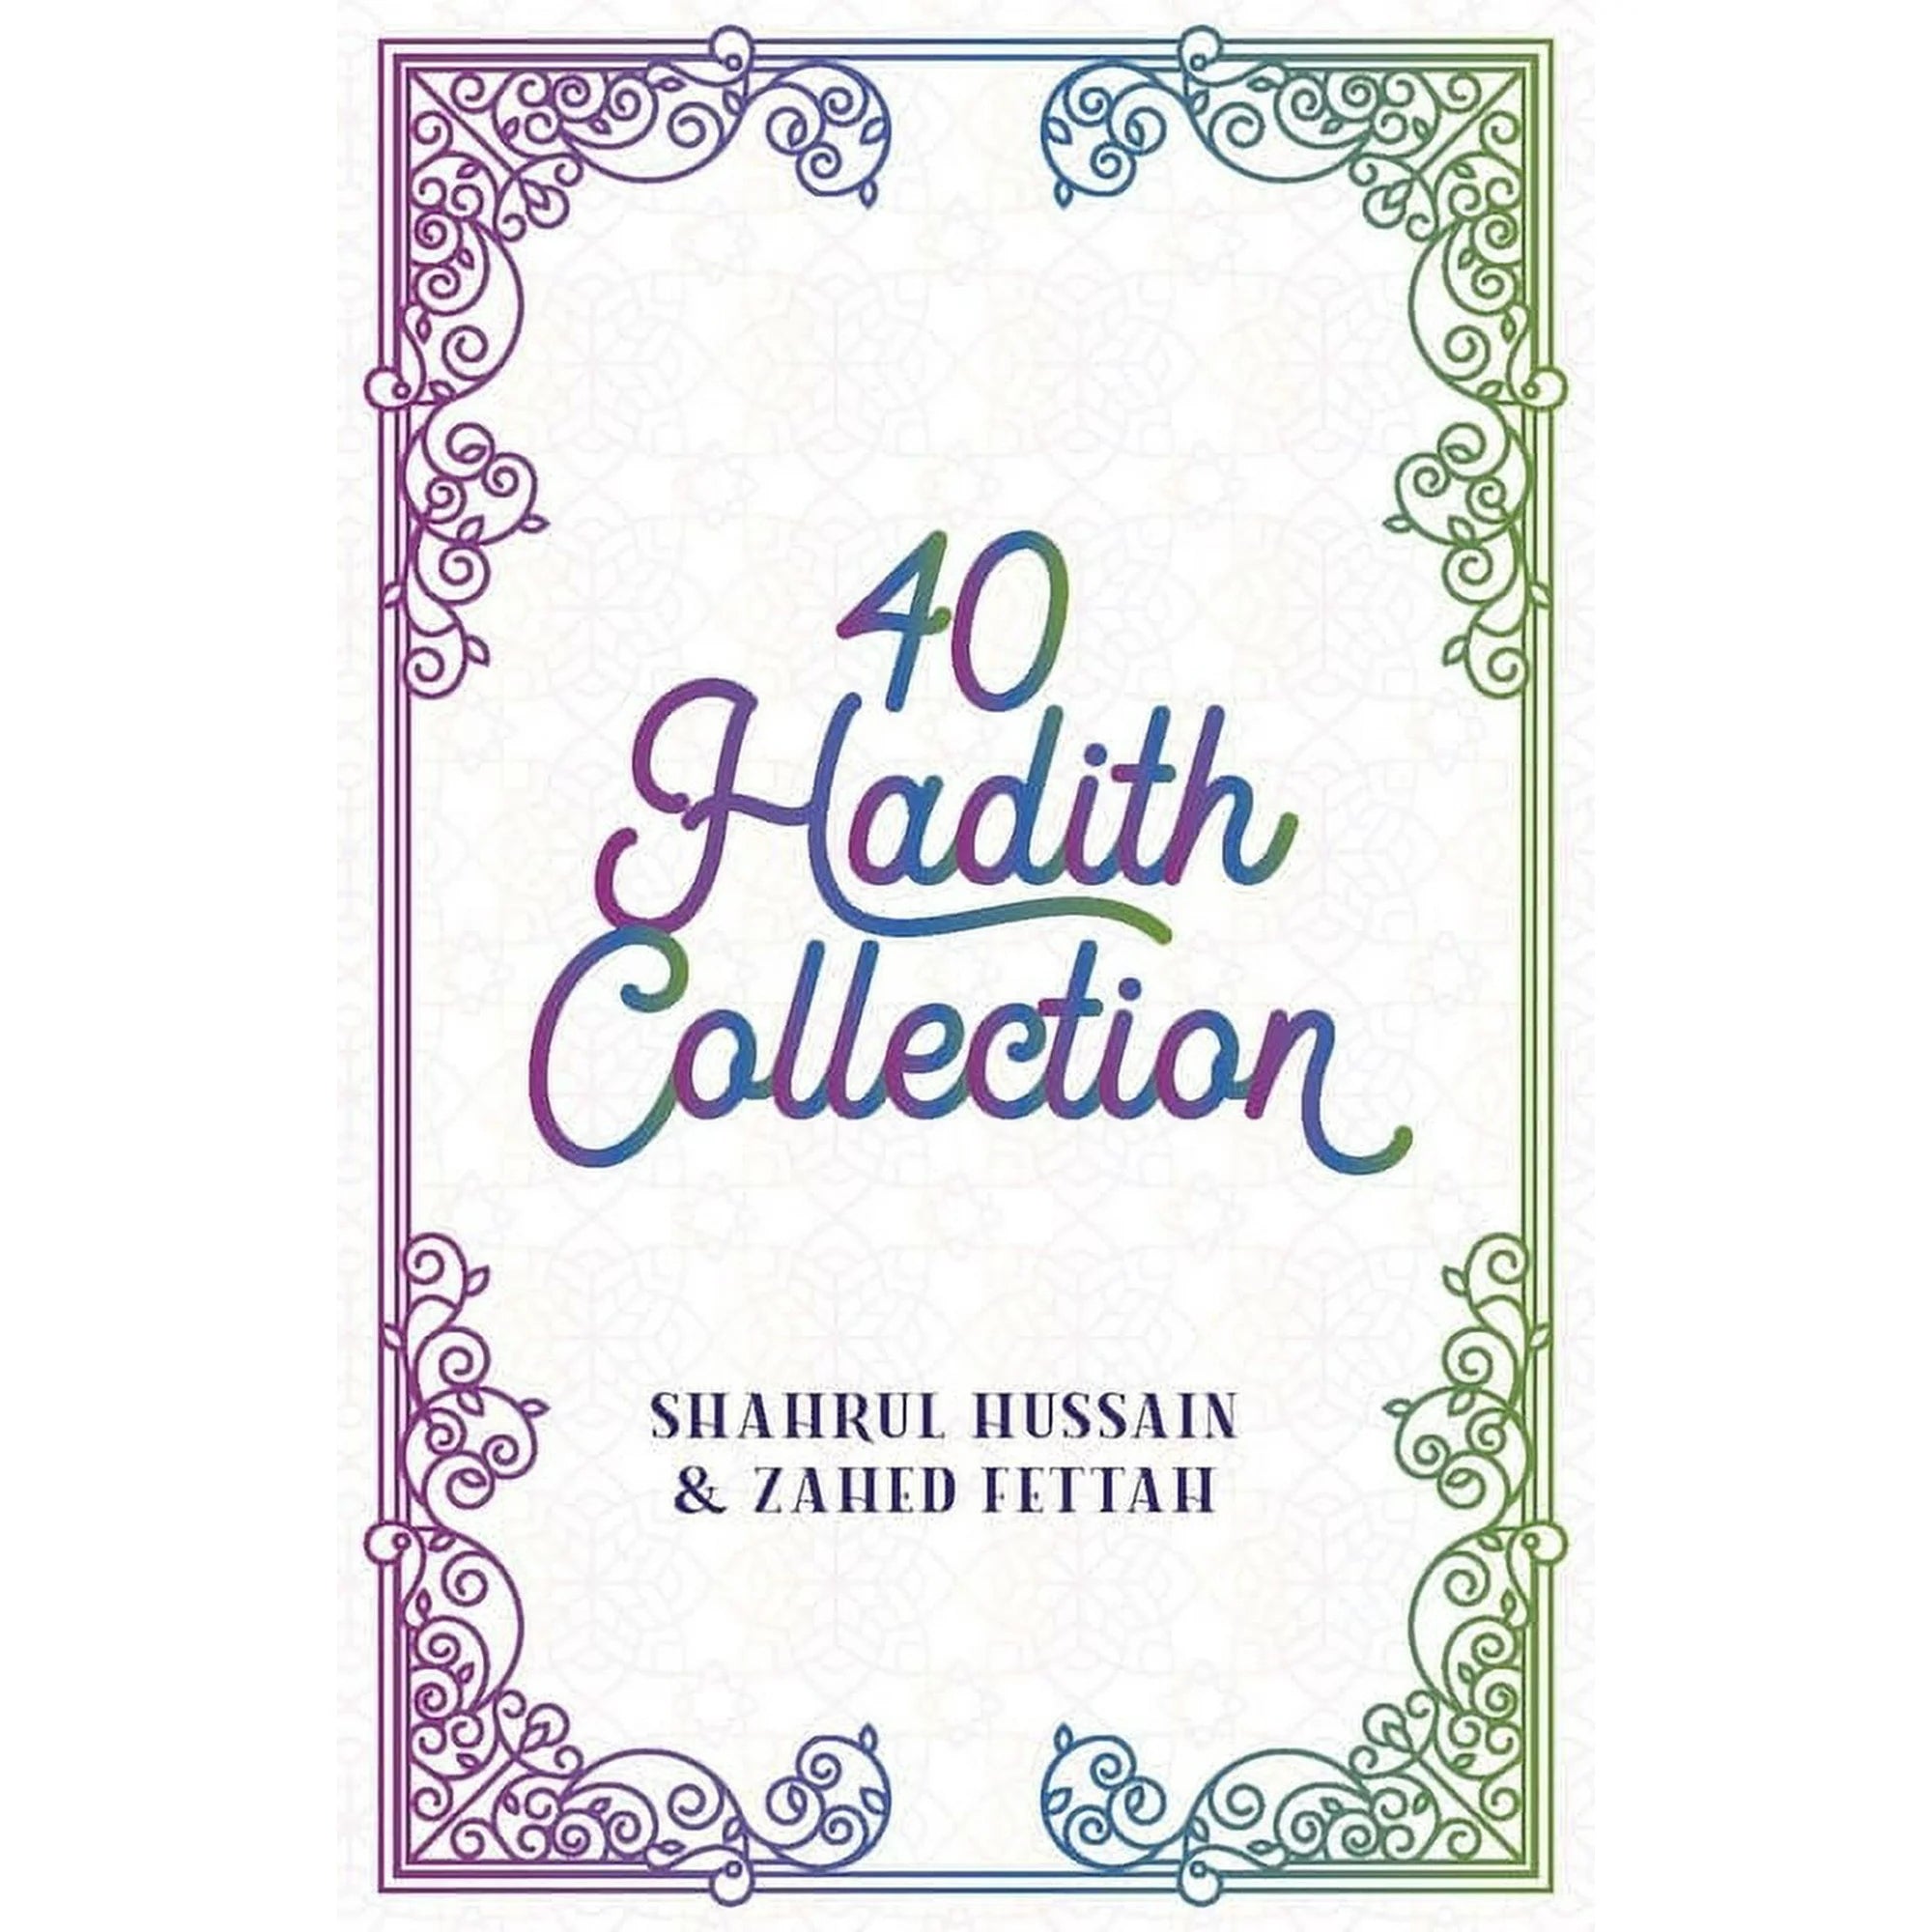 40 Hadith Collection (Series of 6 Books)